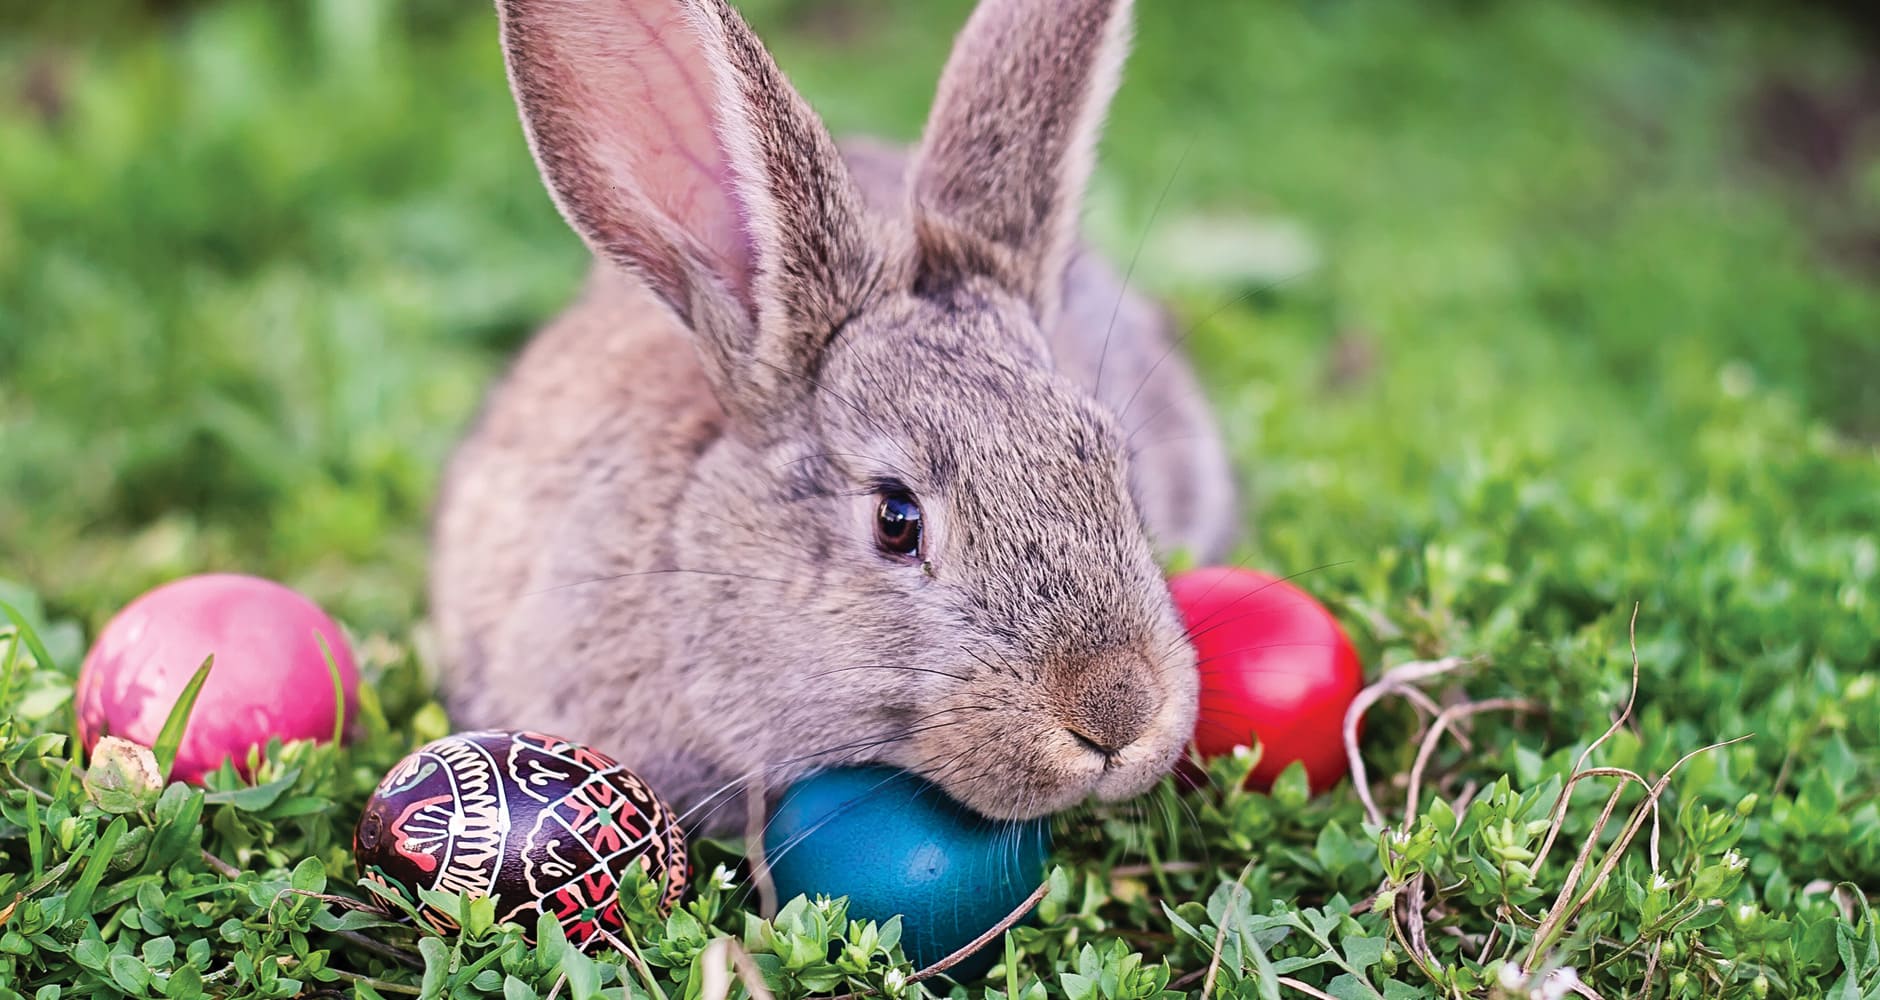 Where Did The Easter Bunny Come From? Farmers' Almanac